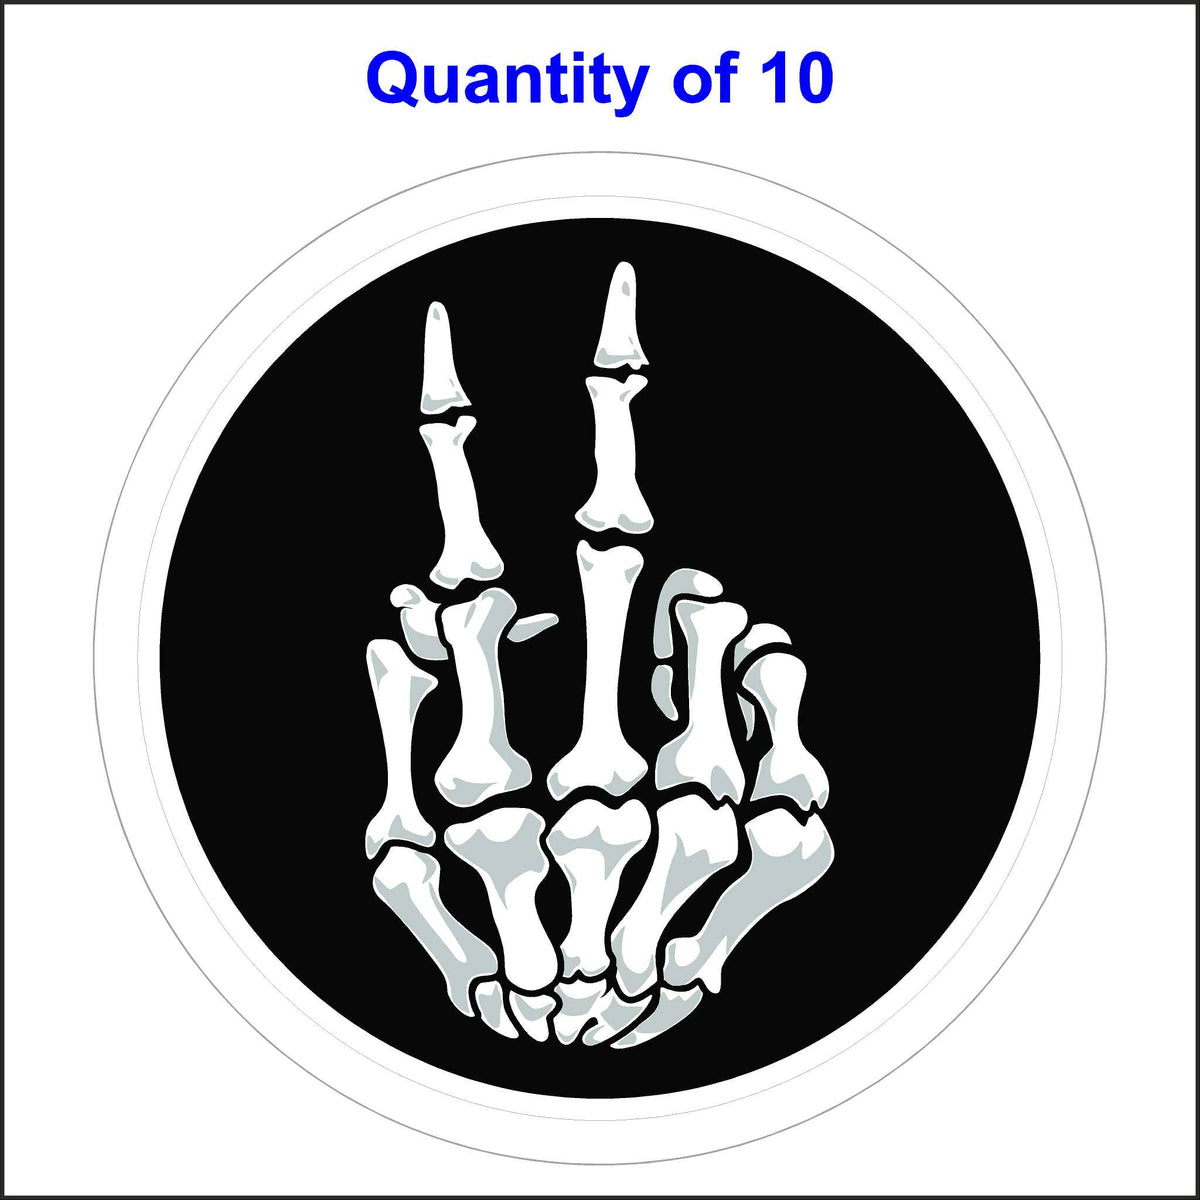 This Skeleton Hand Peace Sign Sticker Has a Skeleton Hand Showing the Peace Sign On a Black Background. 10 Quantity